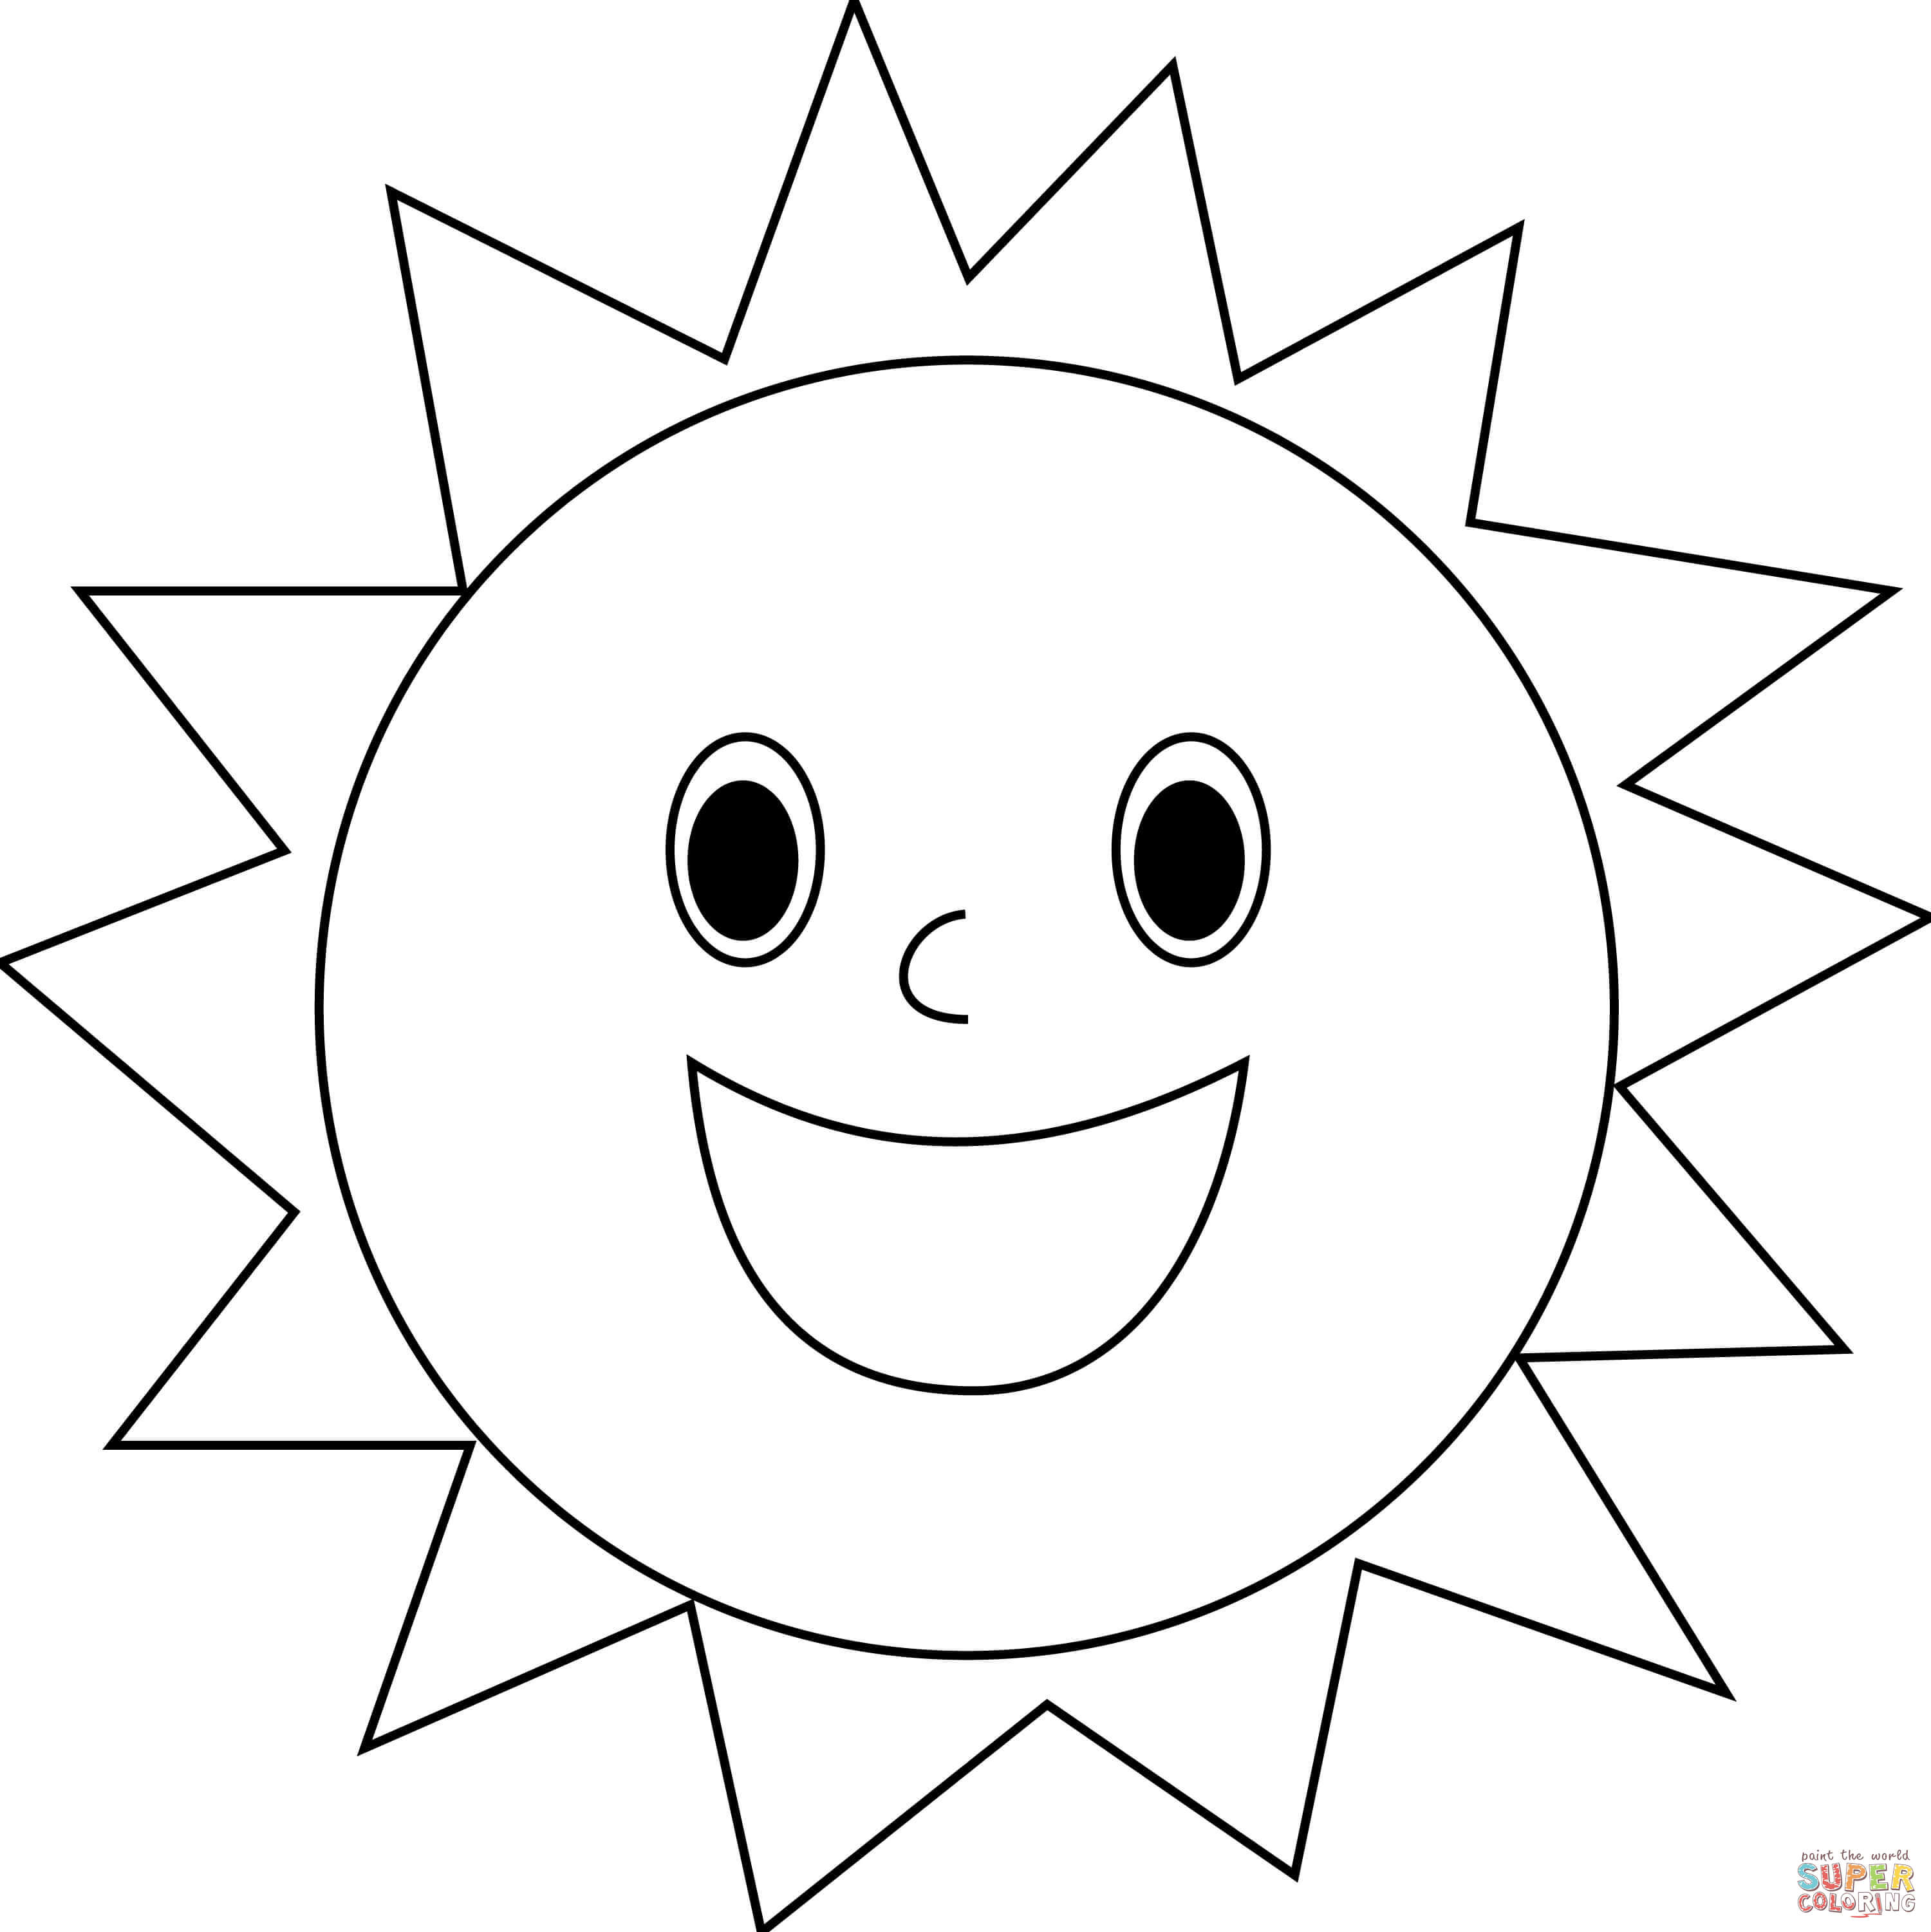 Smiling sun coloring page free printable coloring pages